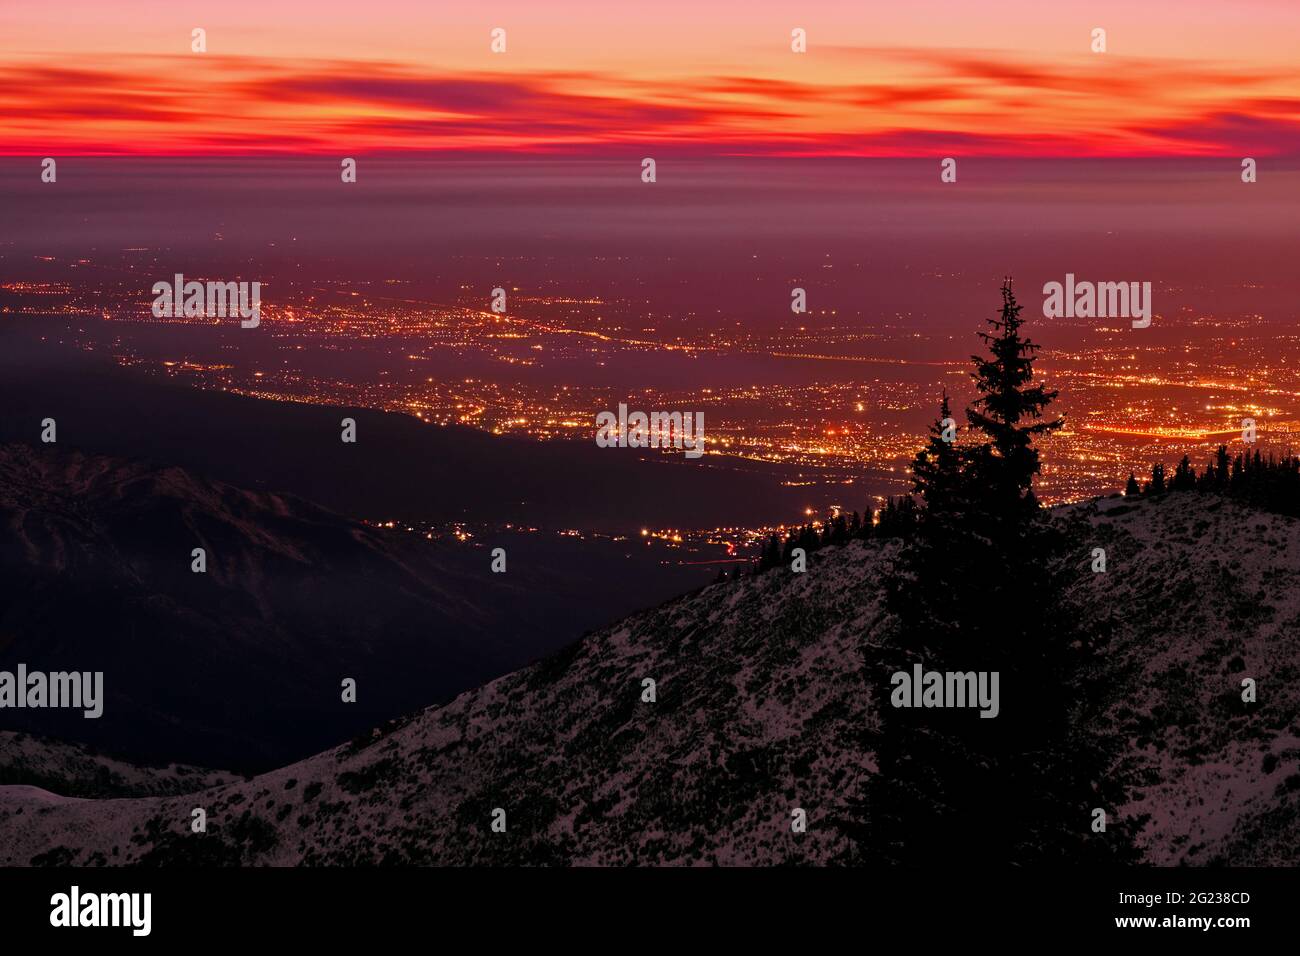 Aerial view of snow-capped mountains on the background of night city lights and sunset clouds Stock Photo